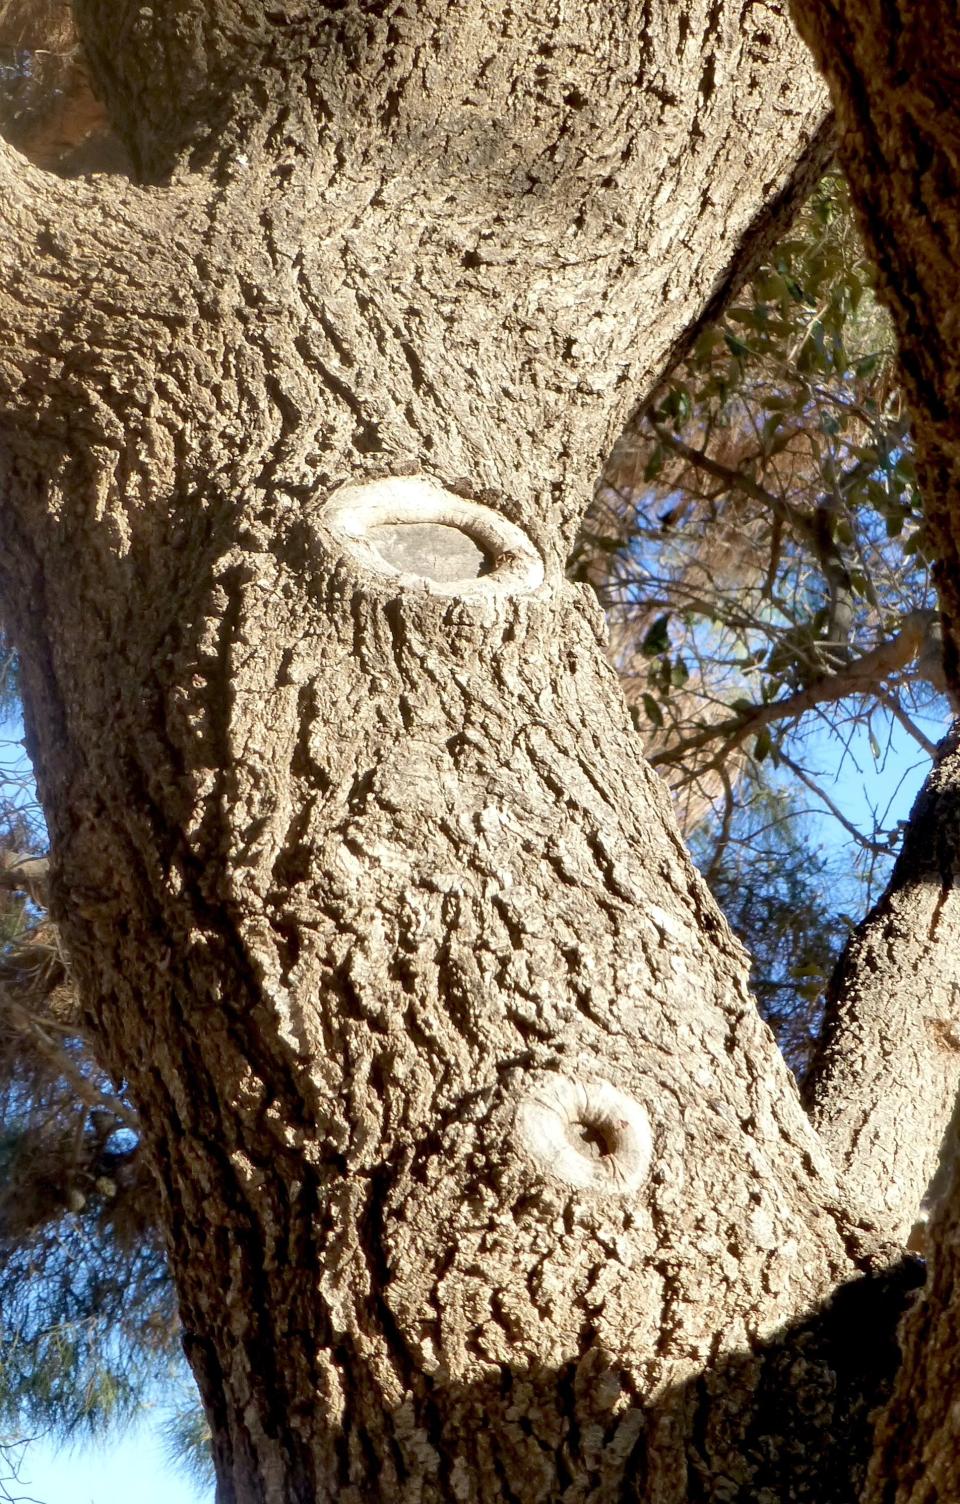 Two correct pruning cuts have been made close to the branch collars of this live oak. The branch collar tissue of the lower pruning cut is almost completely healed over as evidenced with perfectly rounded edges enveloping the wound, while the upper branch collar is a newer pruning cut with tissues that are in the process of completely healing over the wound.